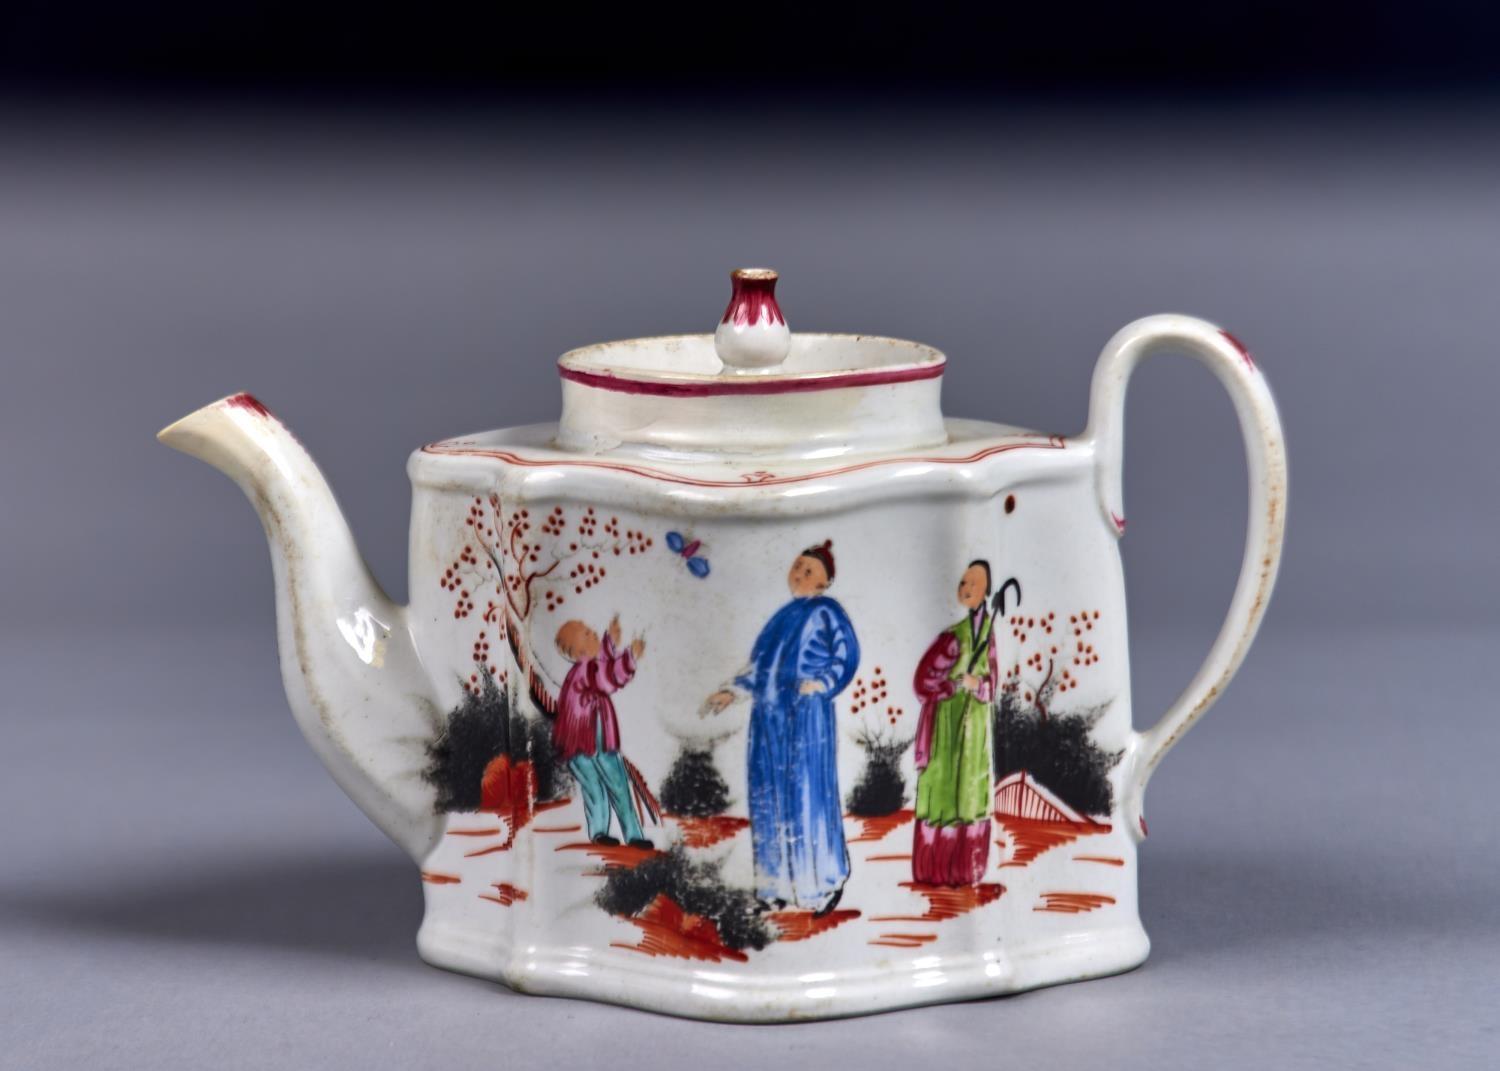 A NEW HALL TEAPOT, COVER AND TEAPOT STAND, PATTERN 421, C1795-1804, PRINTED AND PAINTED WITH THE BOY - Image 2 of 2